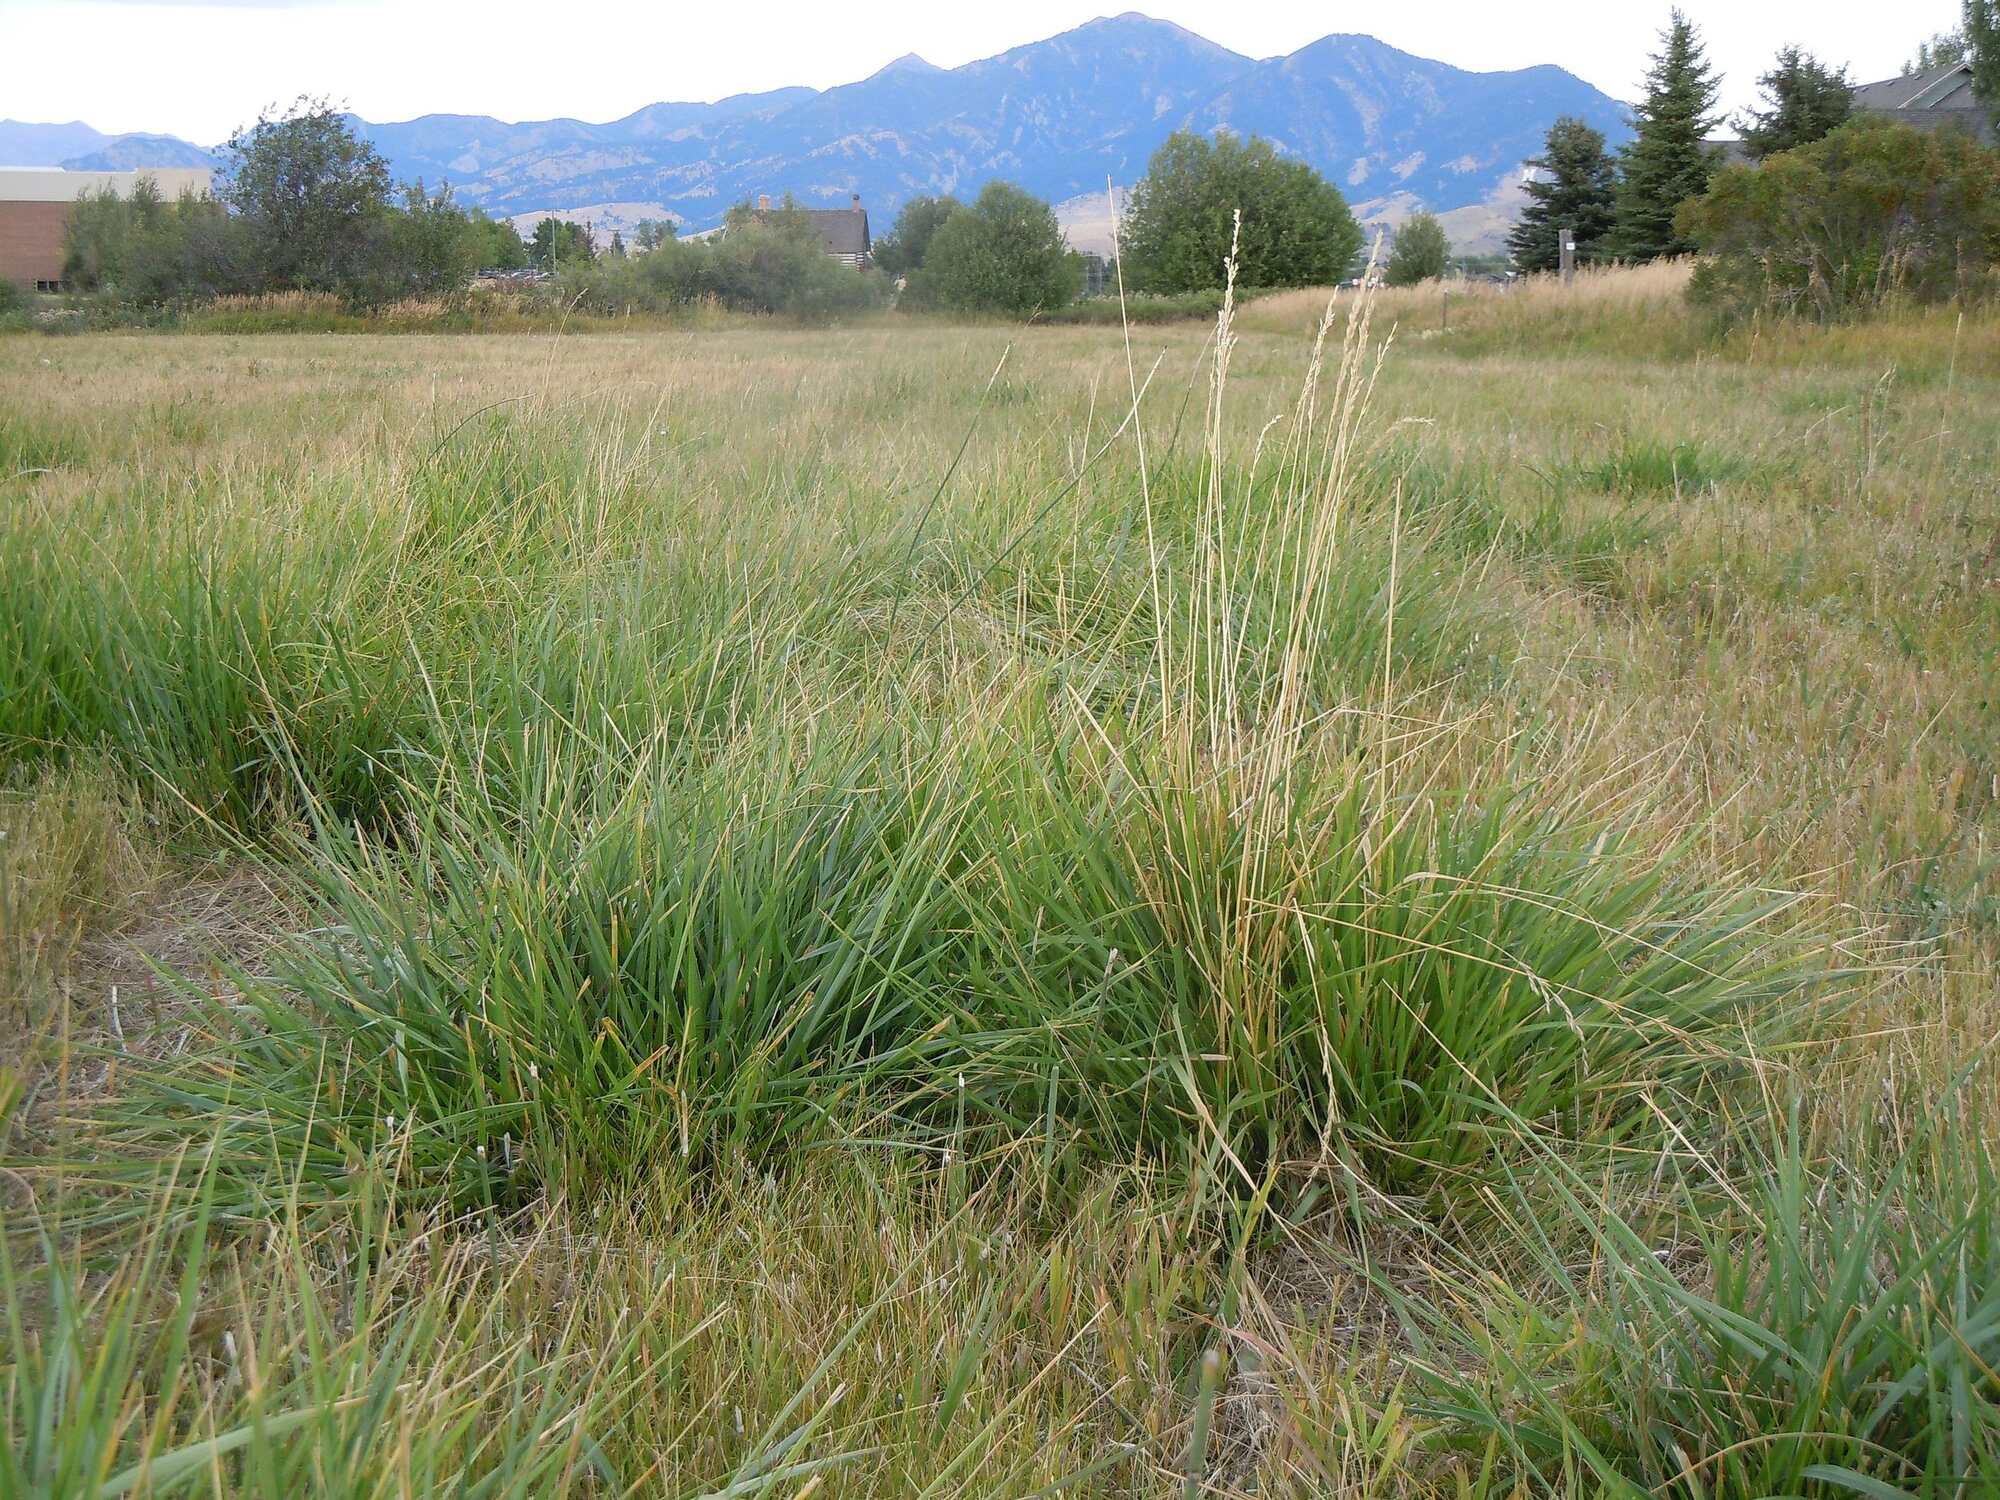 Photograph of wild tall fescue grass in a field with a mountainous background.